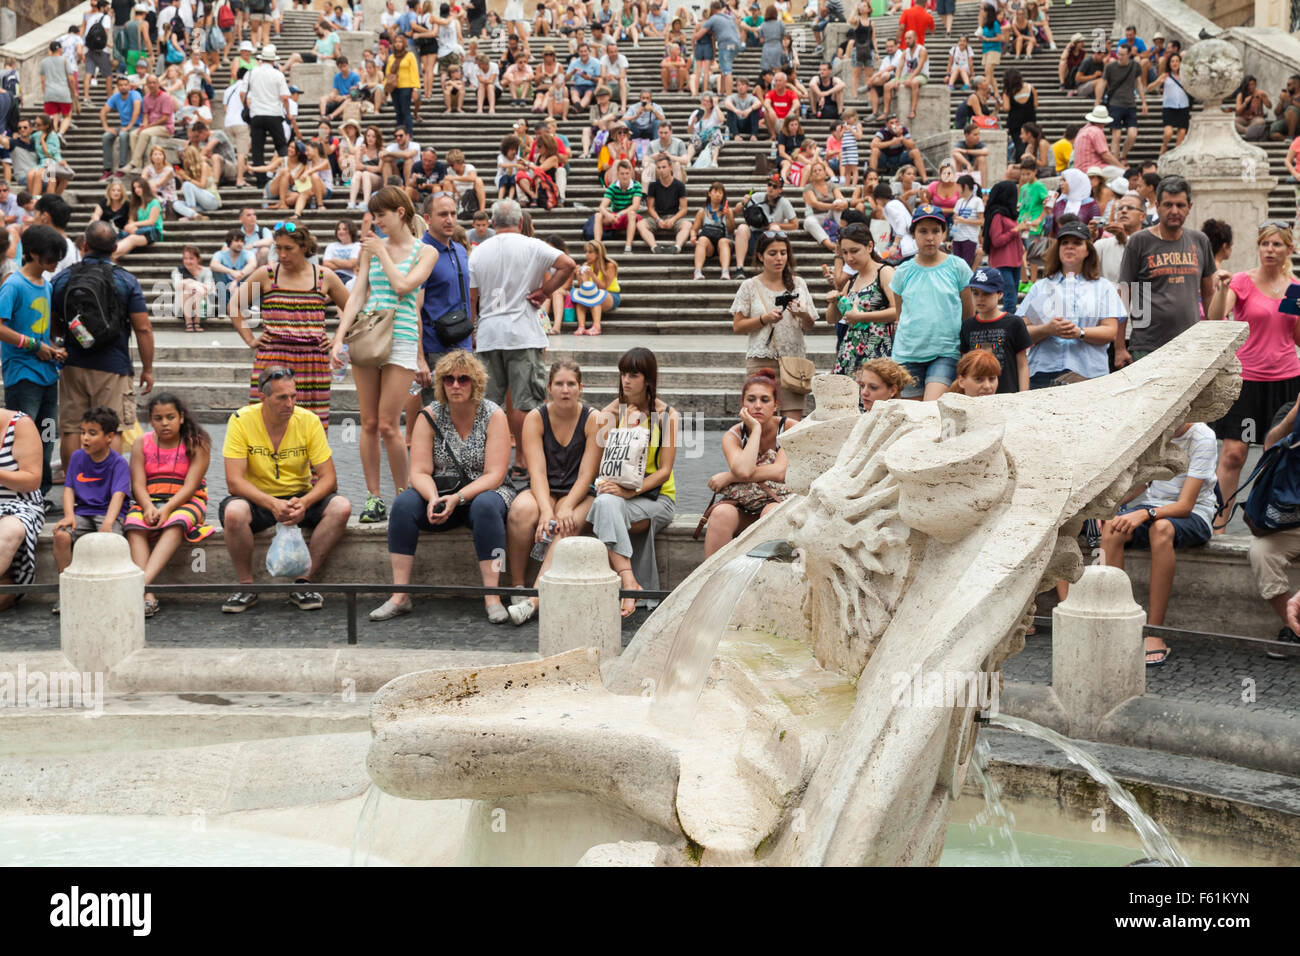 Rome, Italy - August 7, 2015: Crowd of tourists relaxing near Fontana della Barcaccia  on the Piazza di Spagna Stock Photo